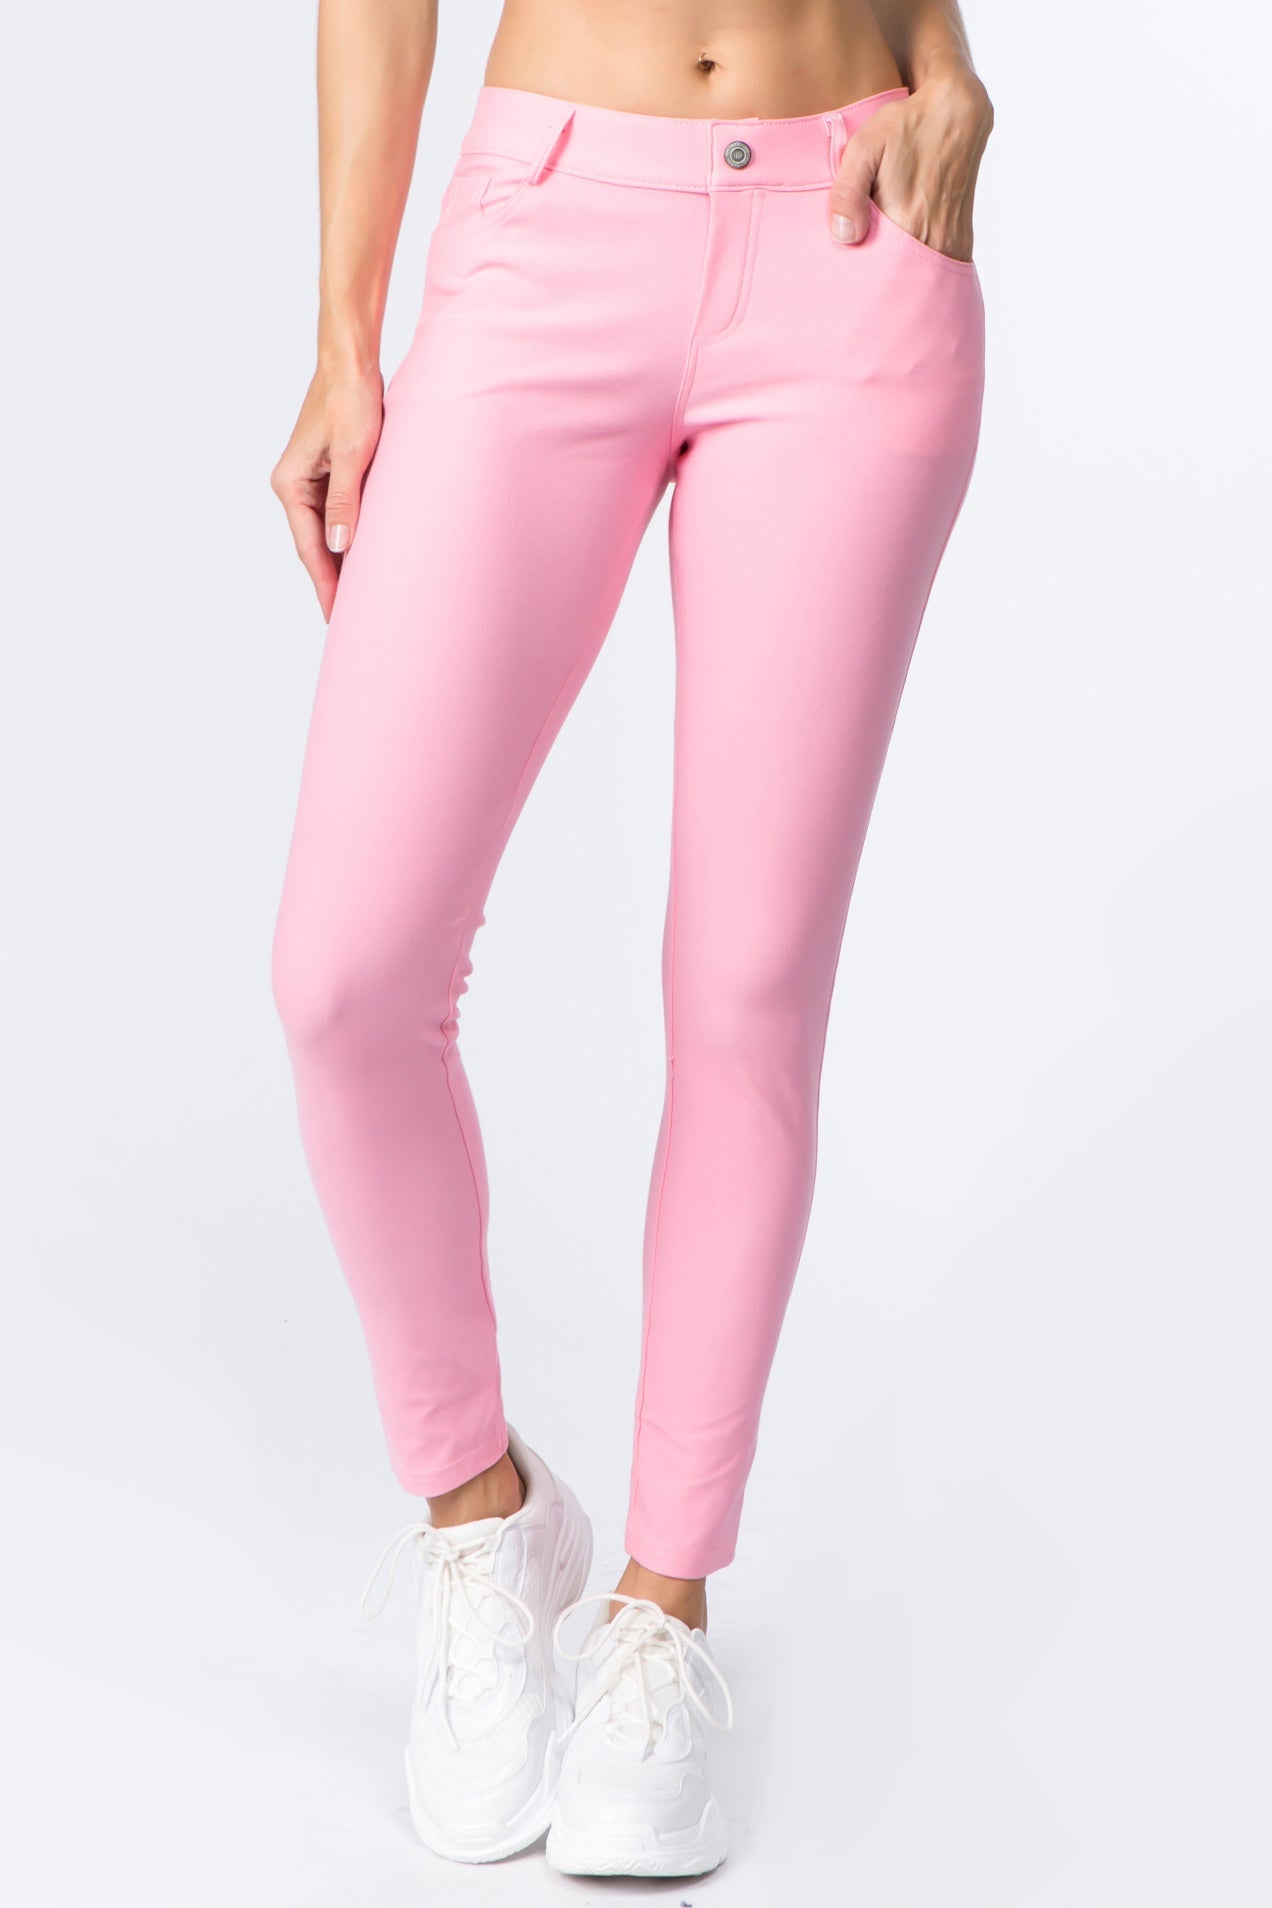 Double Take 5 Pocket Cotton Jeggings – Style Sifter